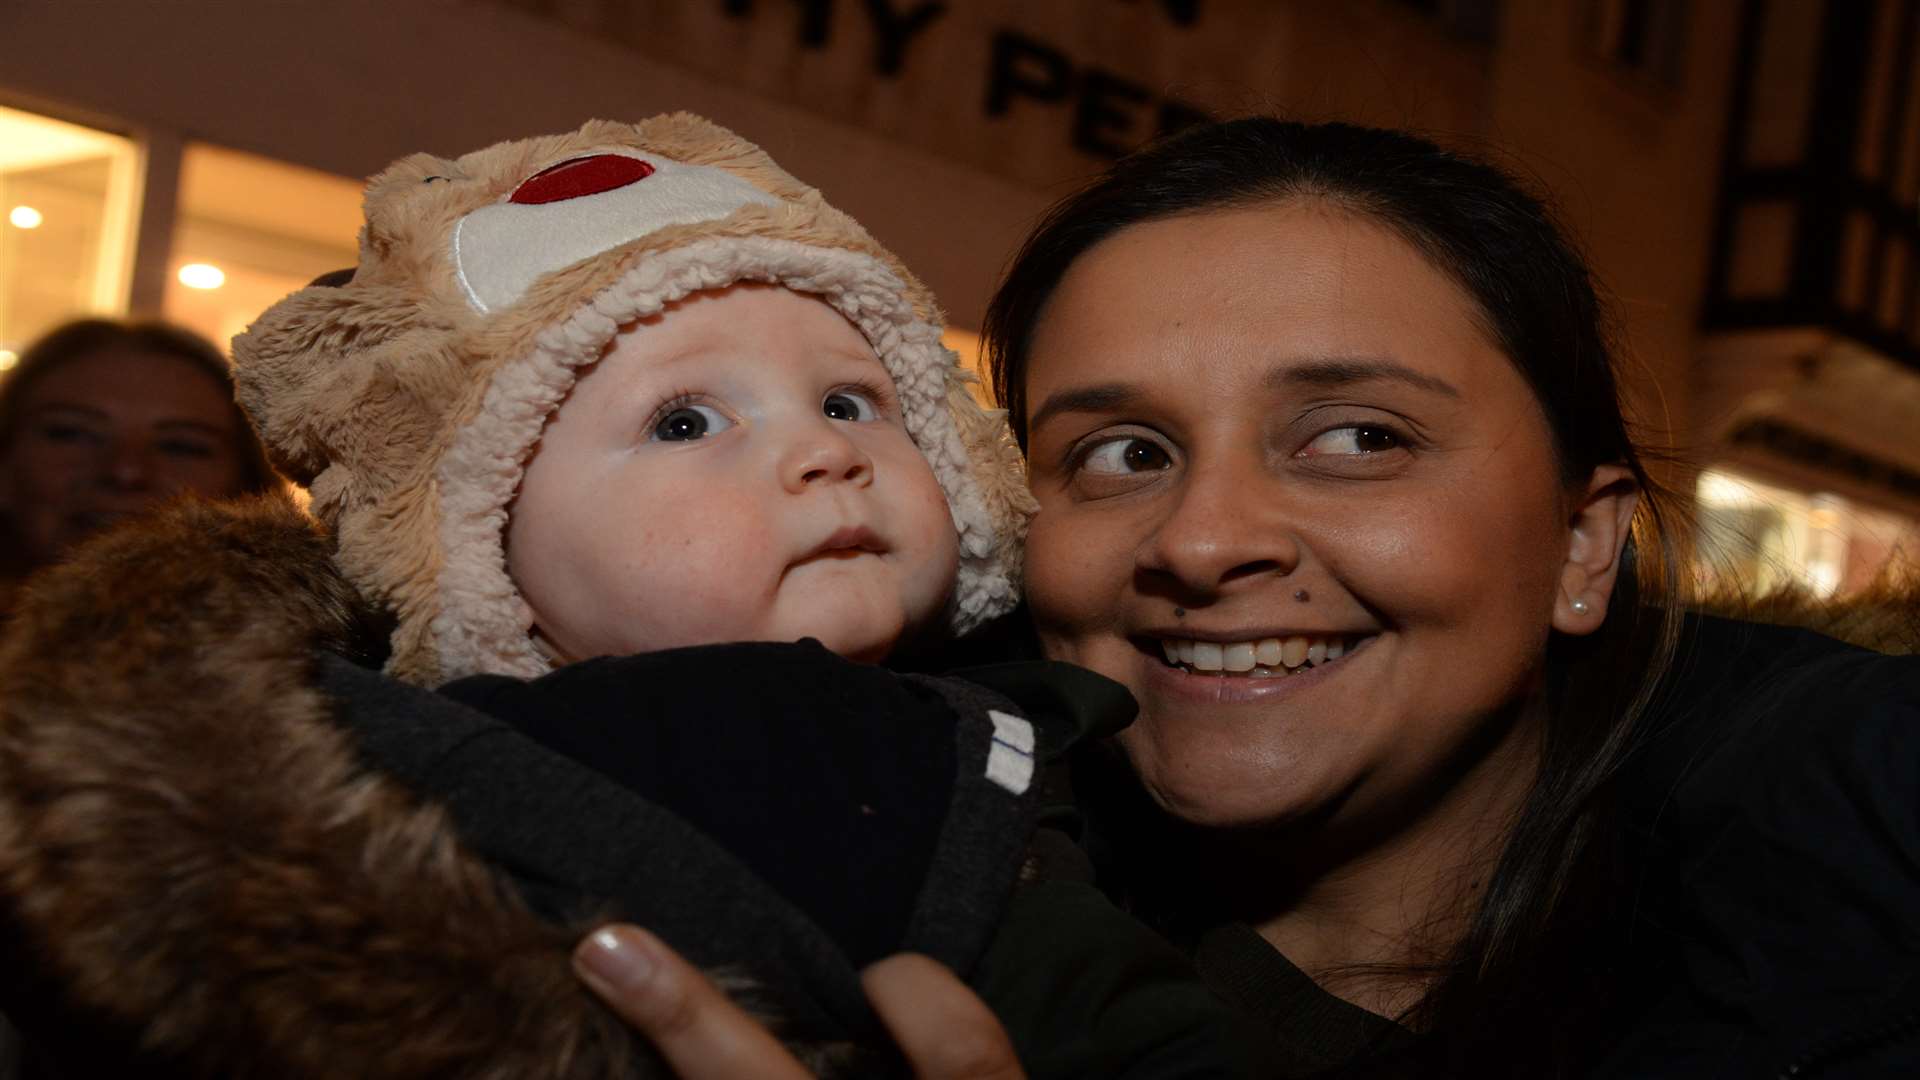 Jayden Henley, 7-months, and his mum Becky at the festive event